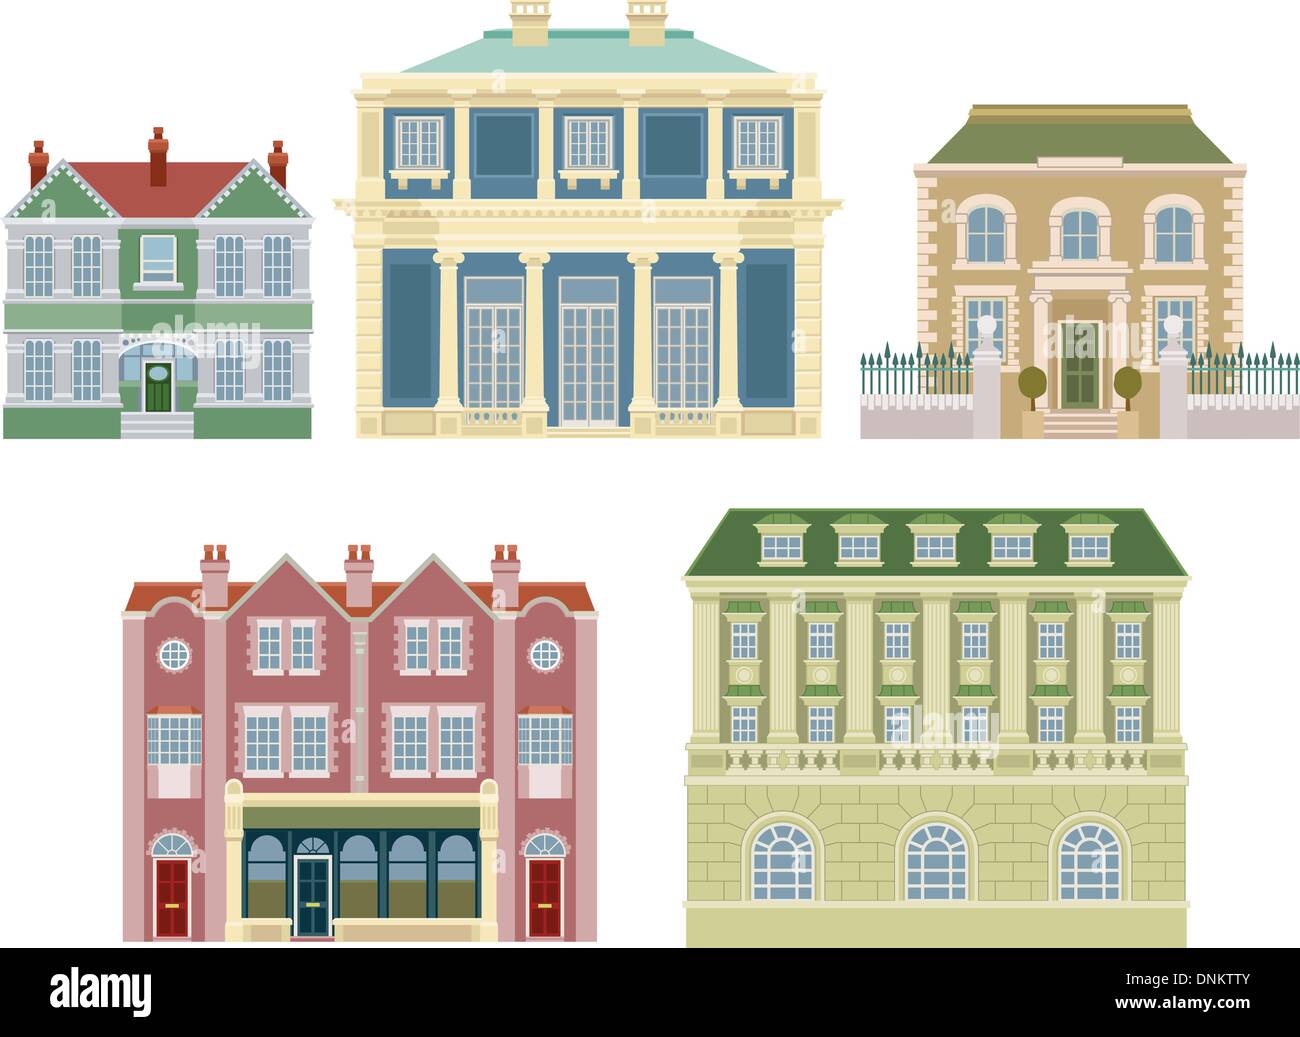 Smart expensive luxury old fashioned houses and other buildings. Stock Vector